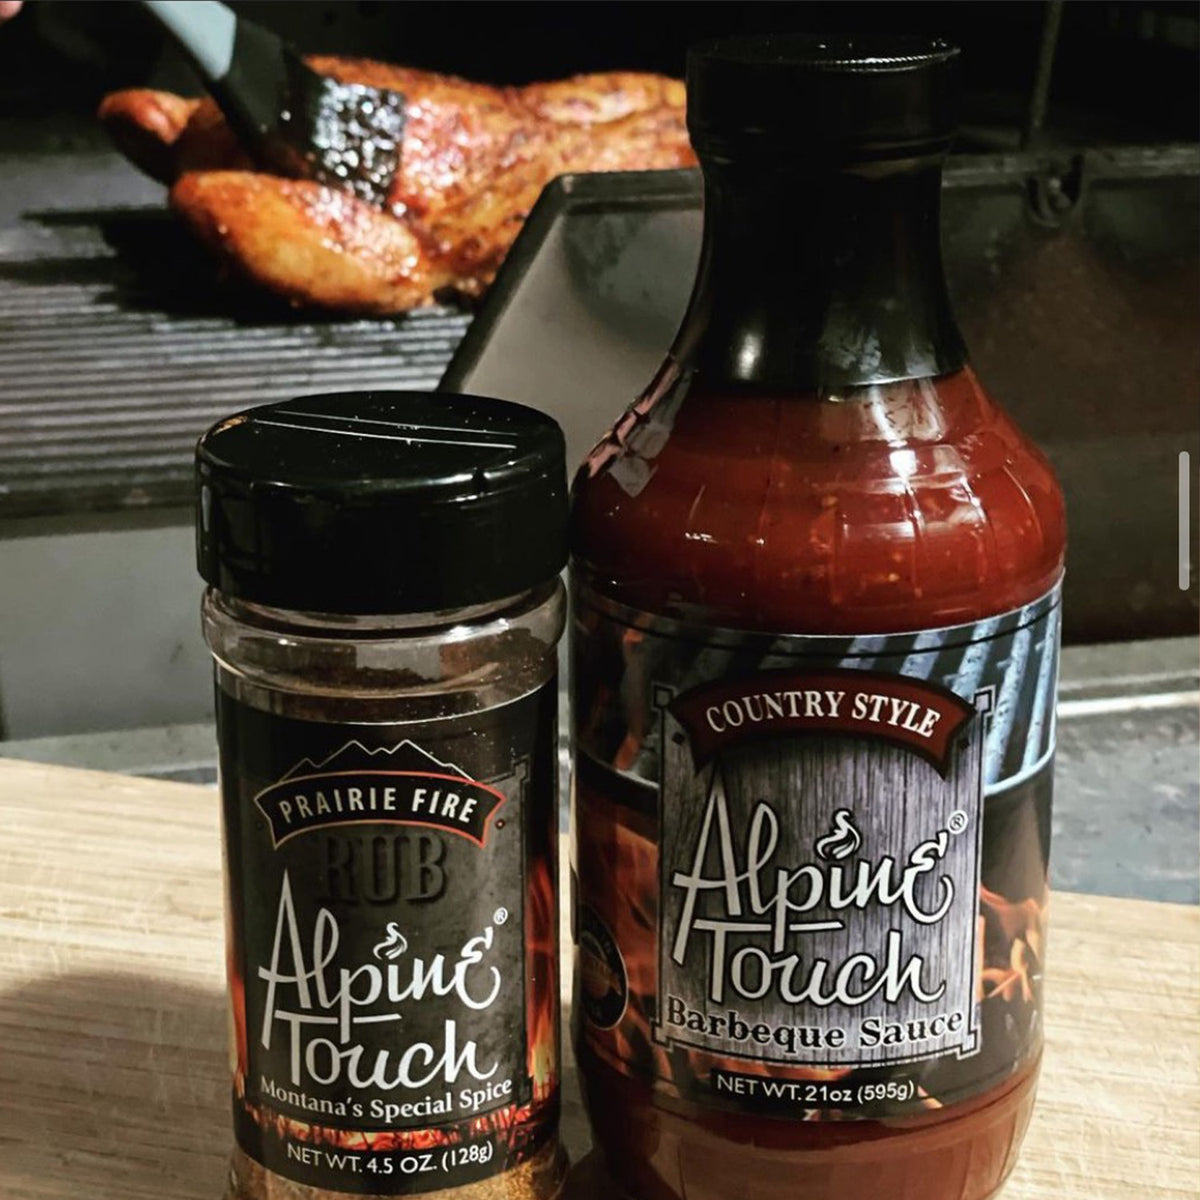 Alpine Country Style BBQ Sauce – Alpine Touch - "Montana's Special Spice"